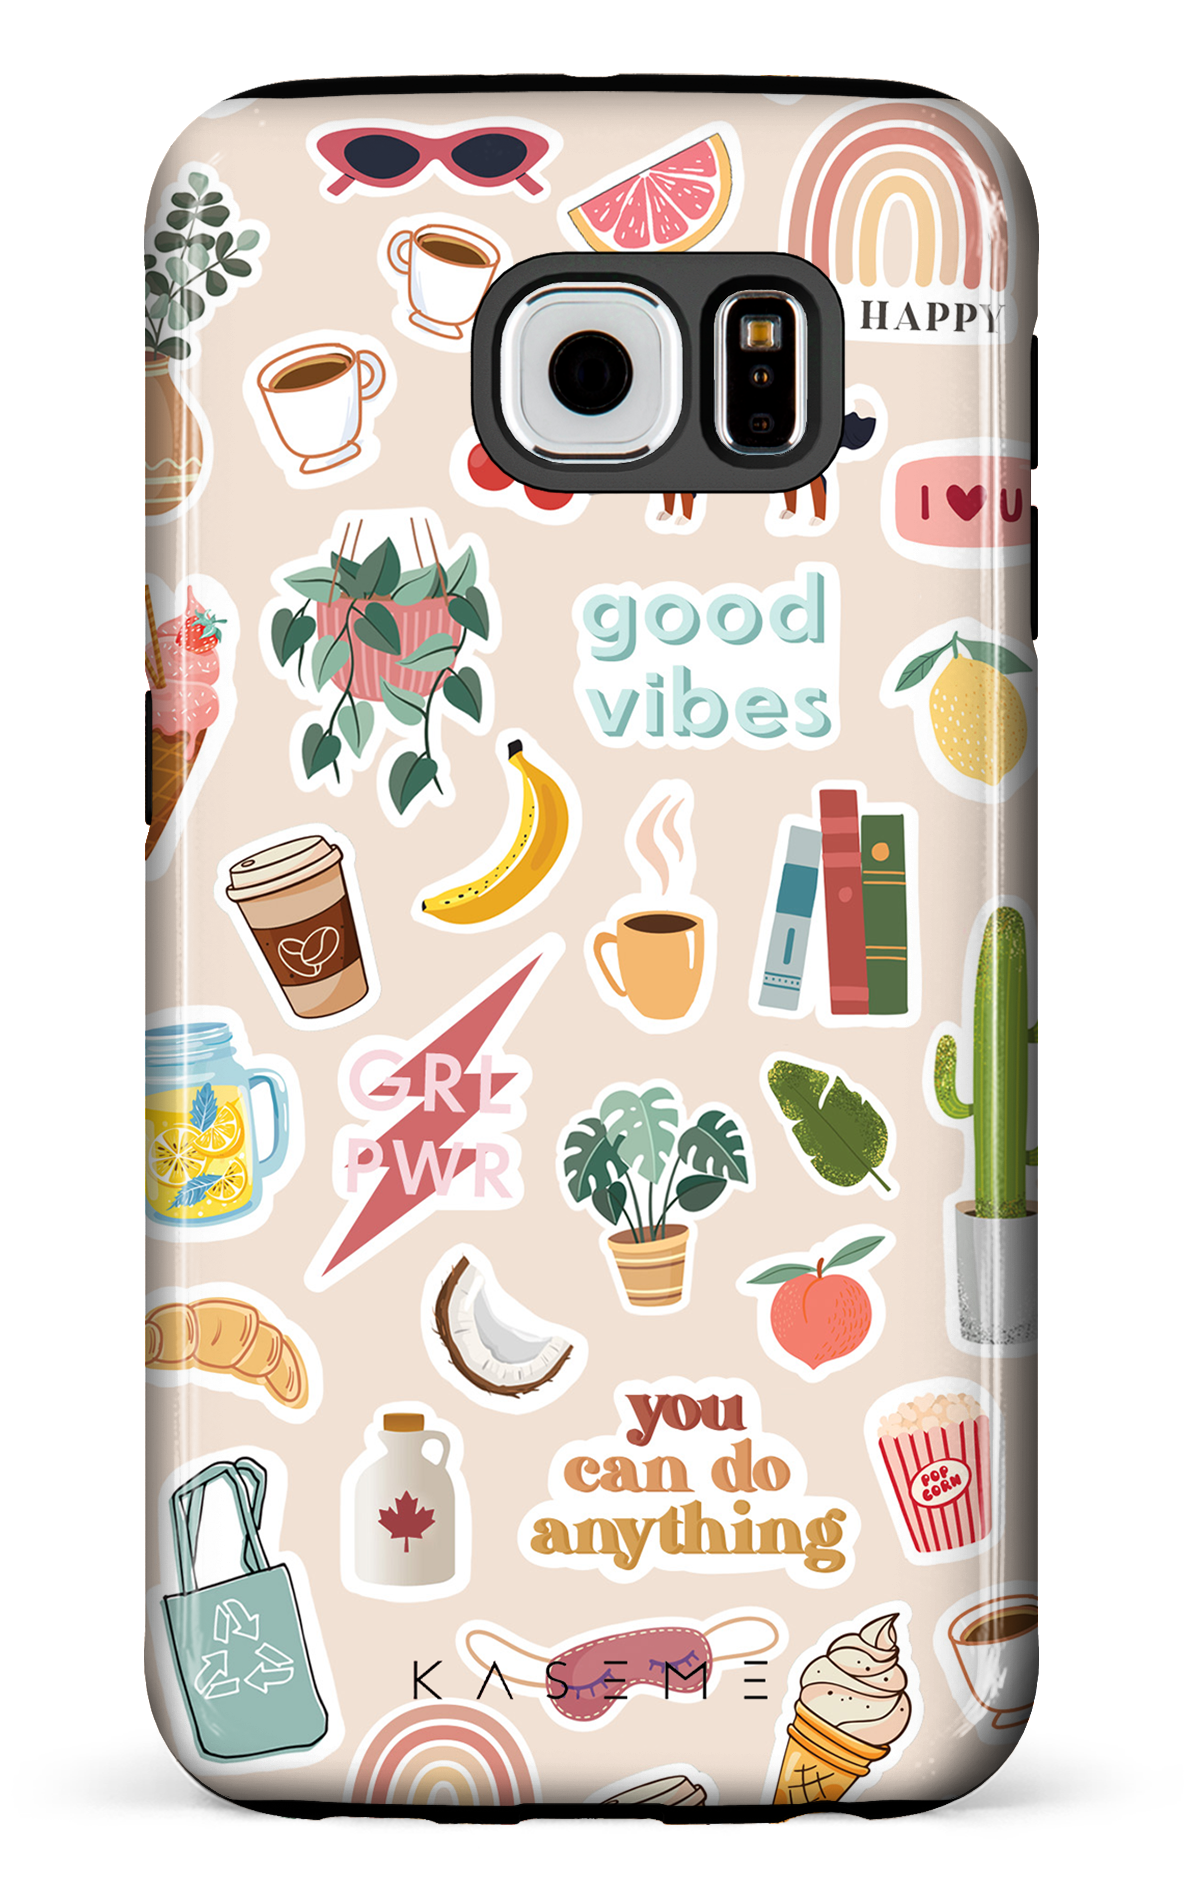 Good vibes by Kim Demers - Galaxy S6